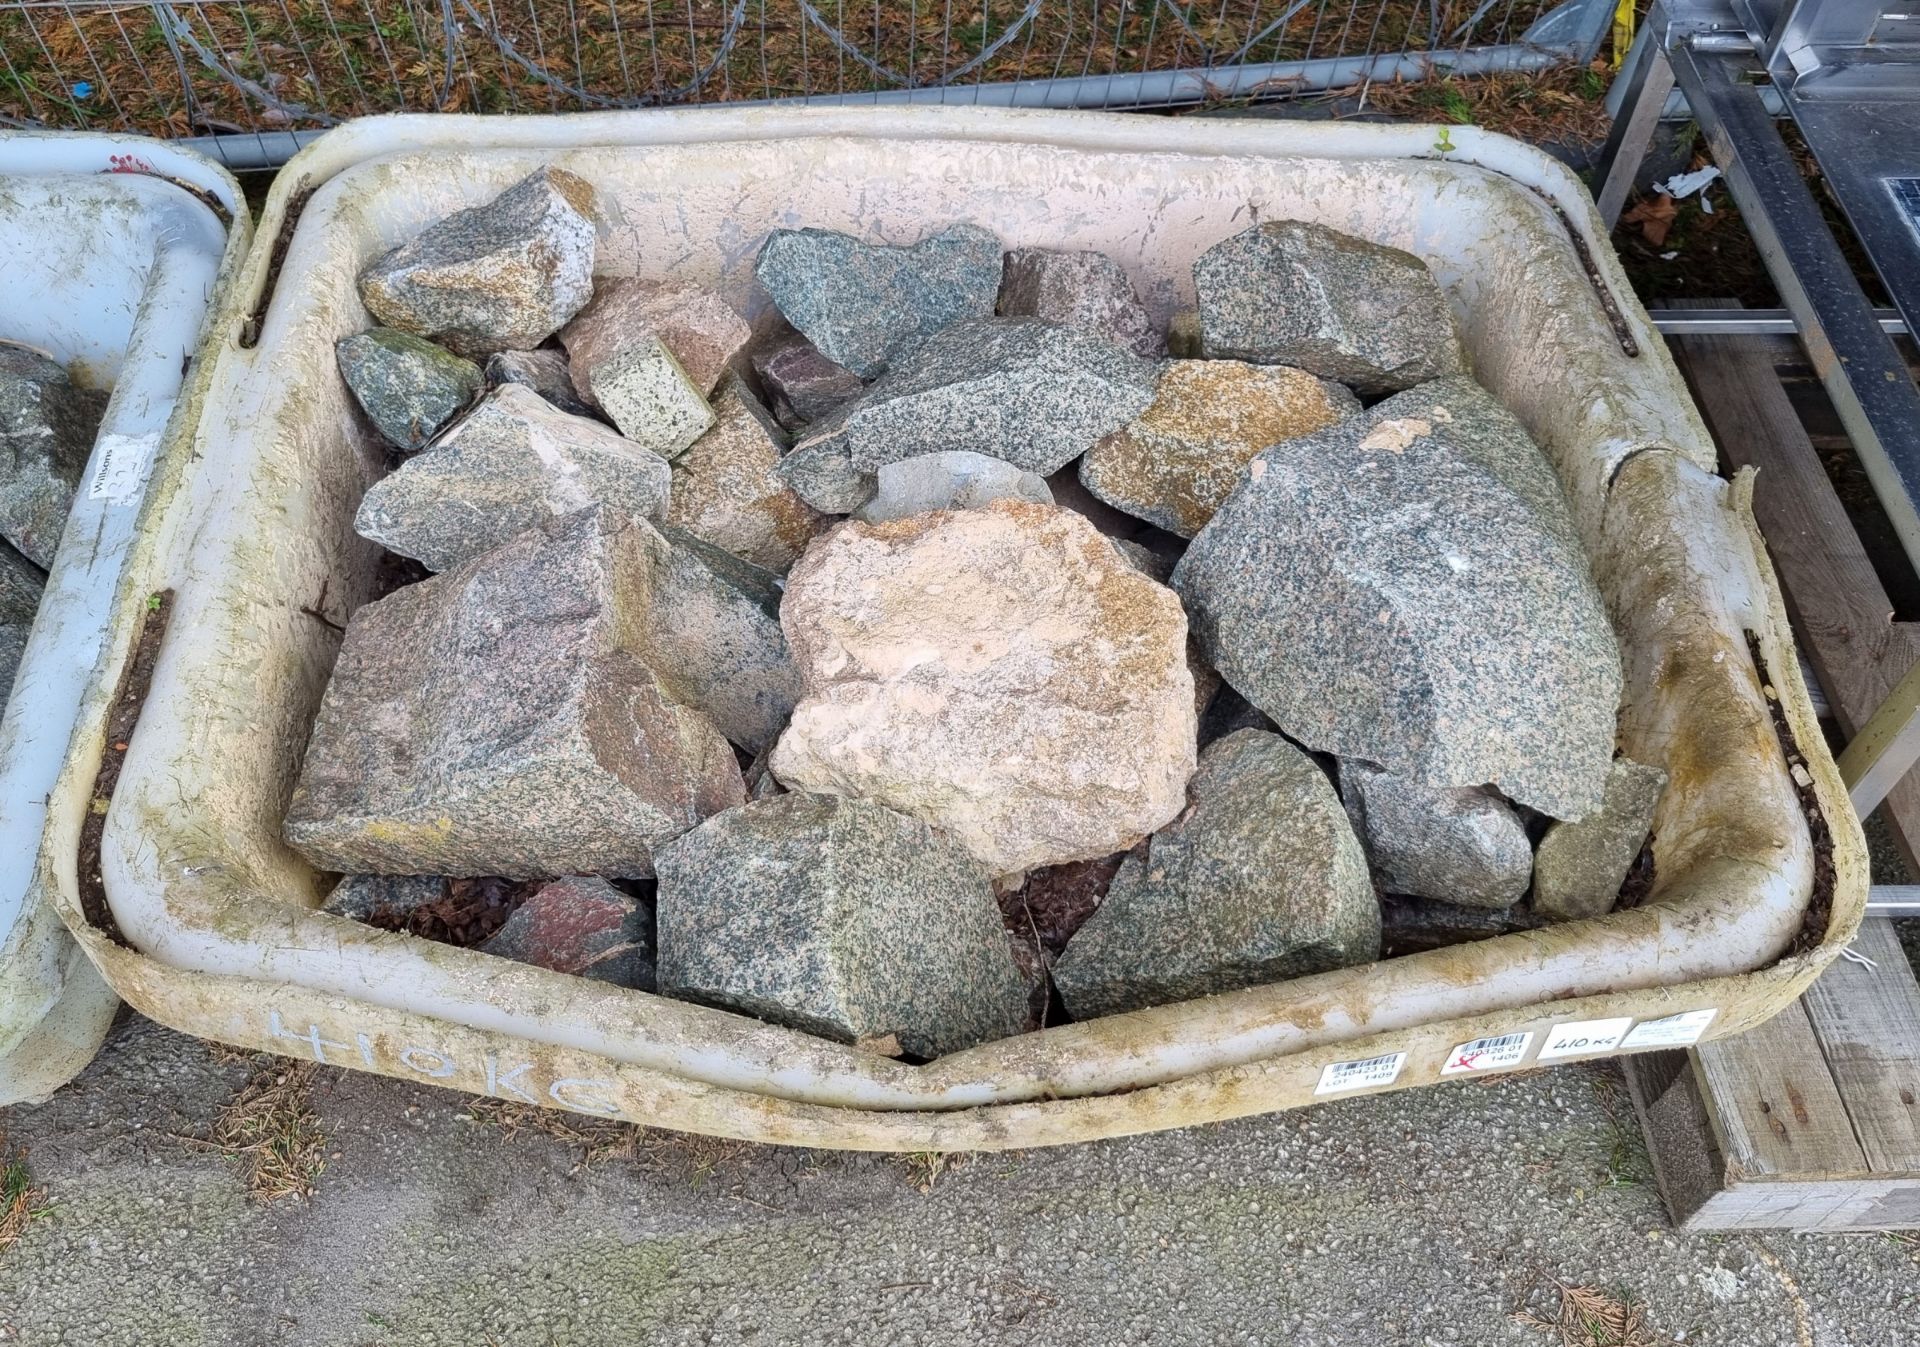 Green and Pink decorative granite stones in plastic container - 410kg - Image 2 of 3